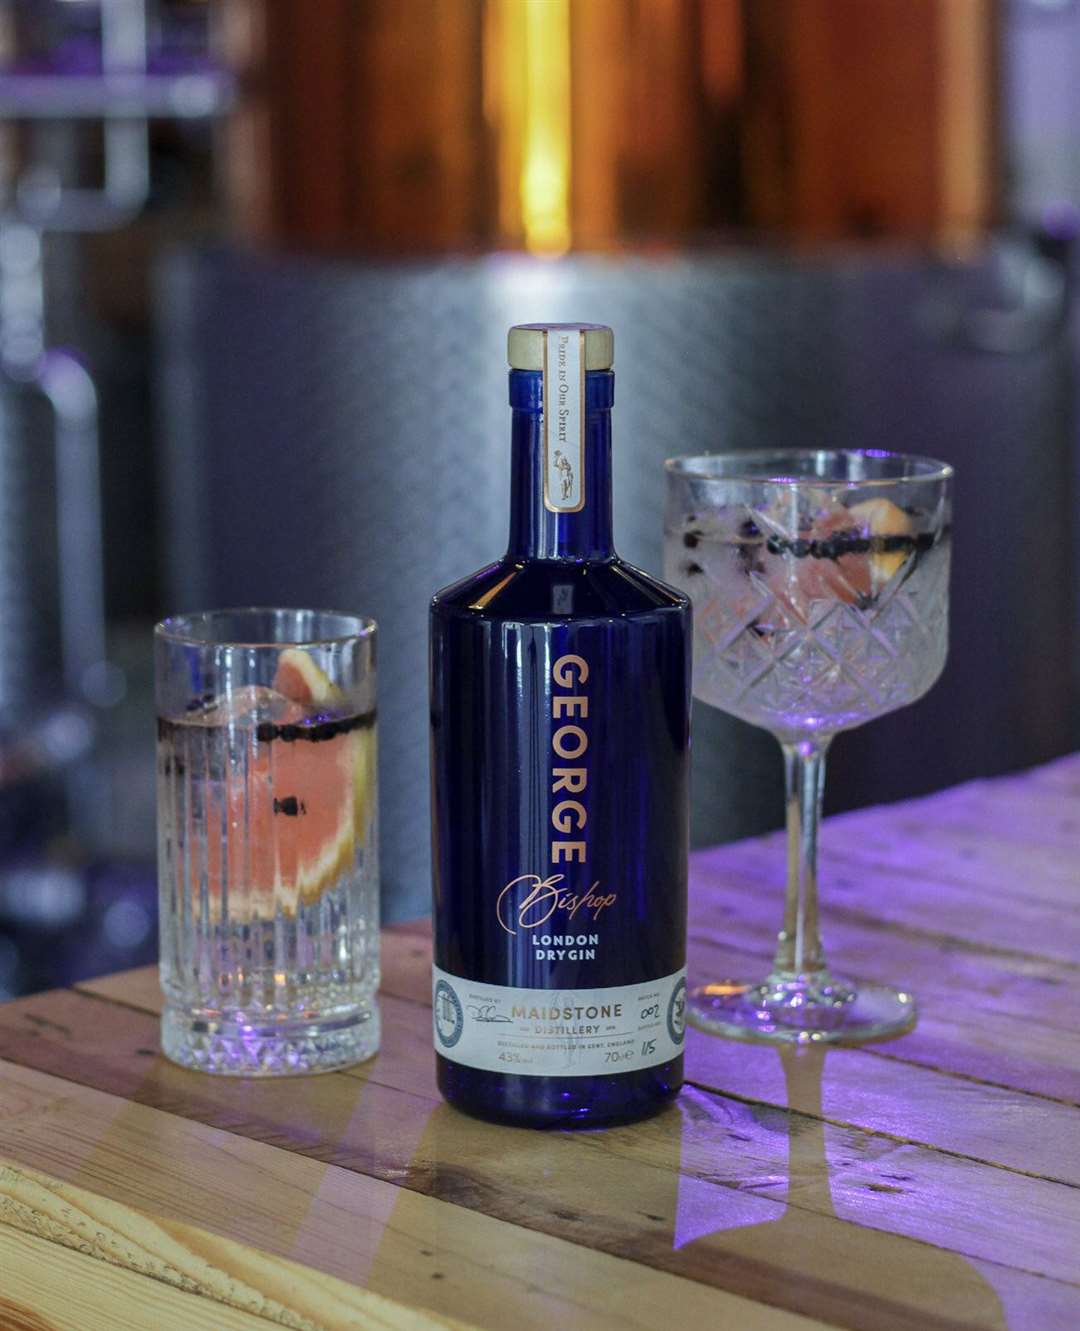 The Stay-tasting gin experience includes Maidstone Distillery's signature George Bishop London Dry Gin